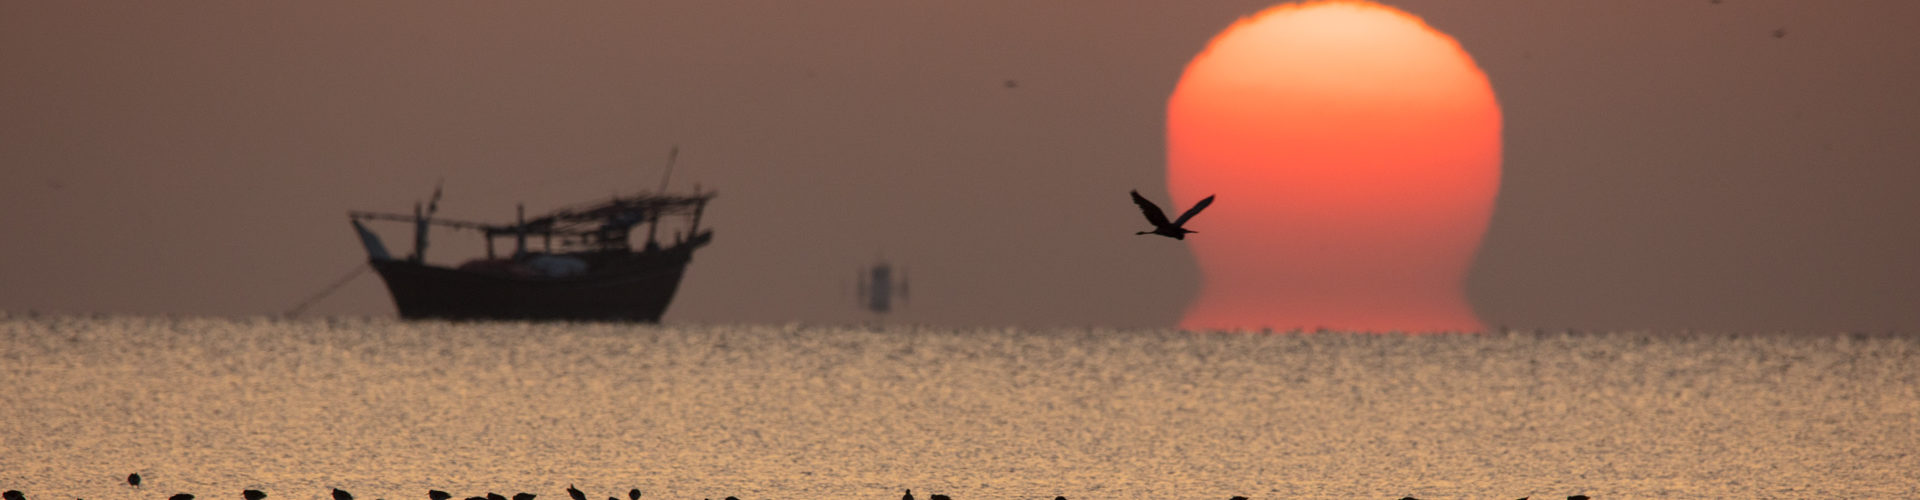 Sunset with a boat and waterbirds